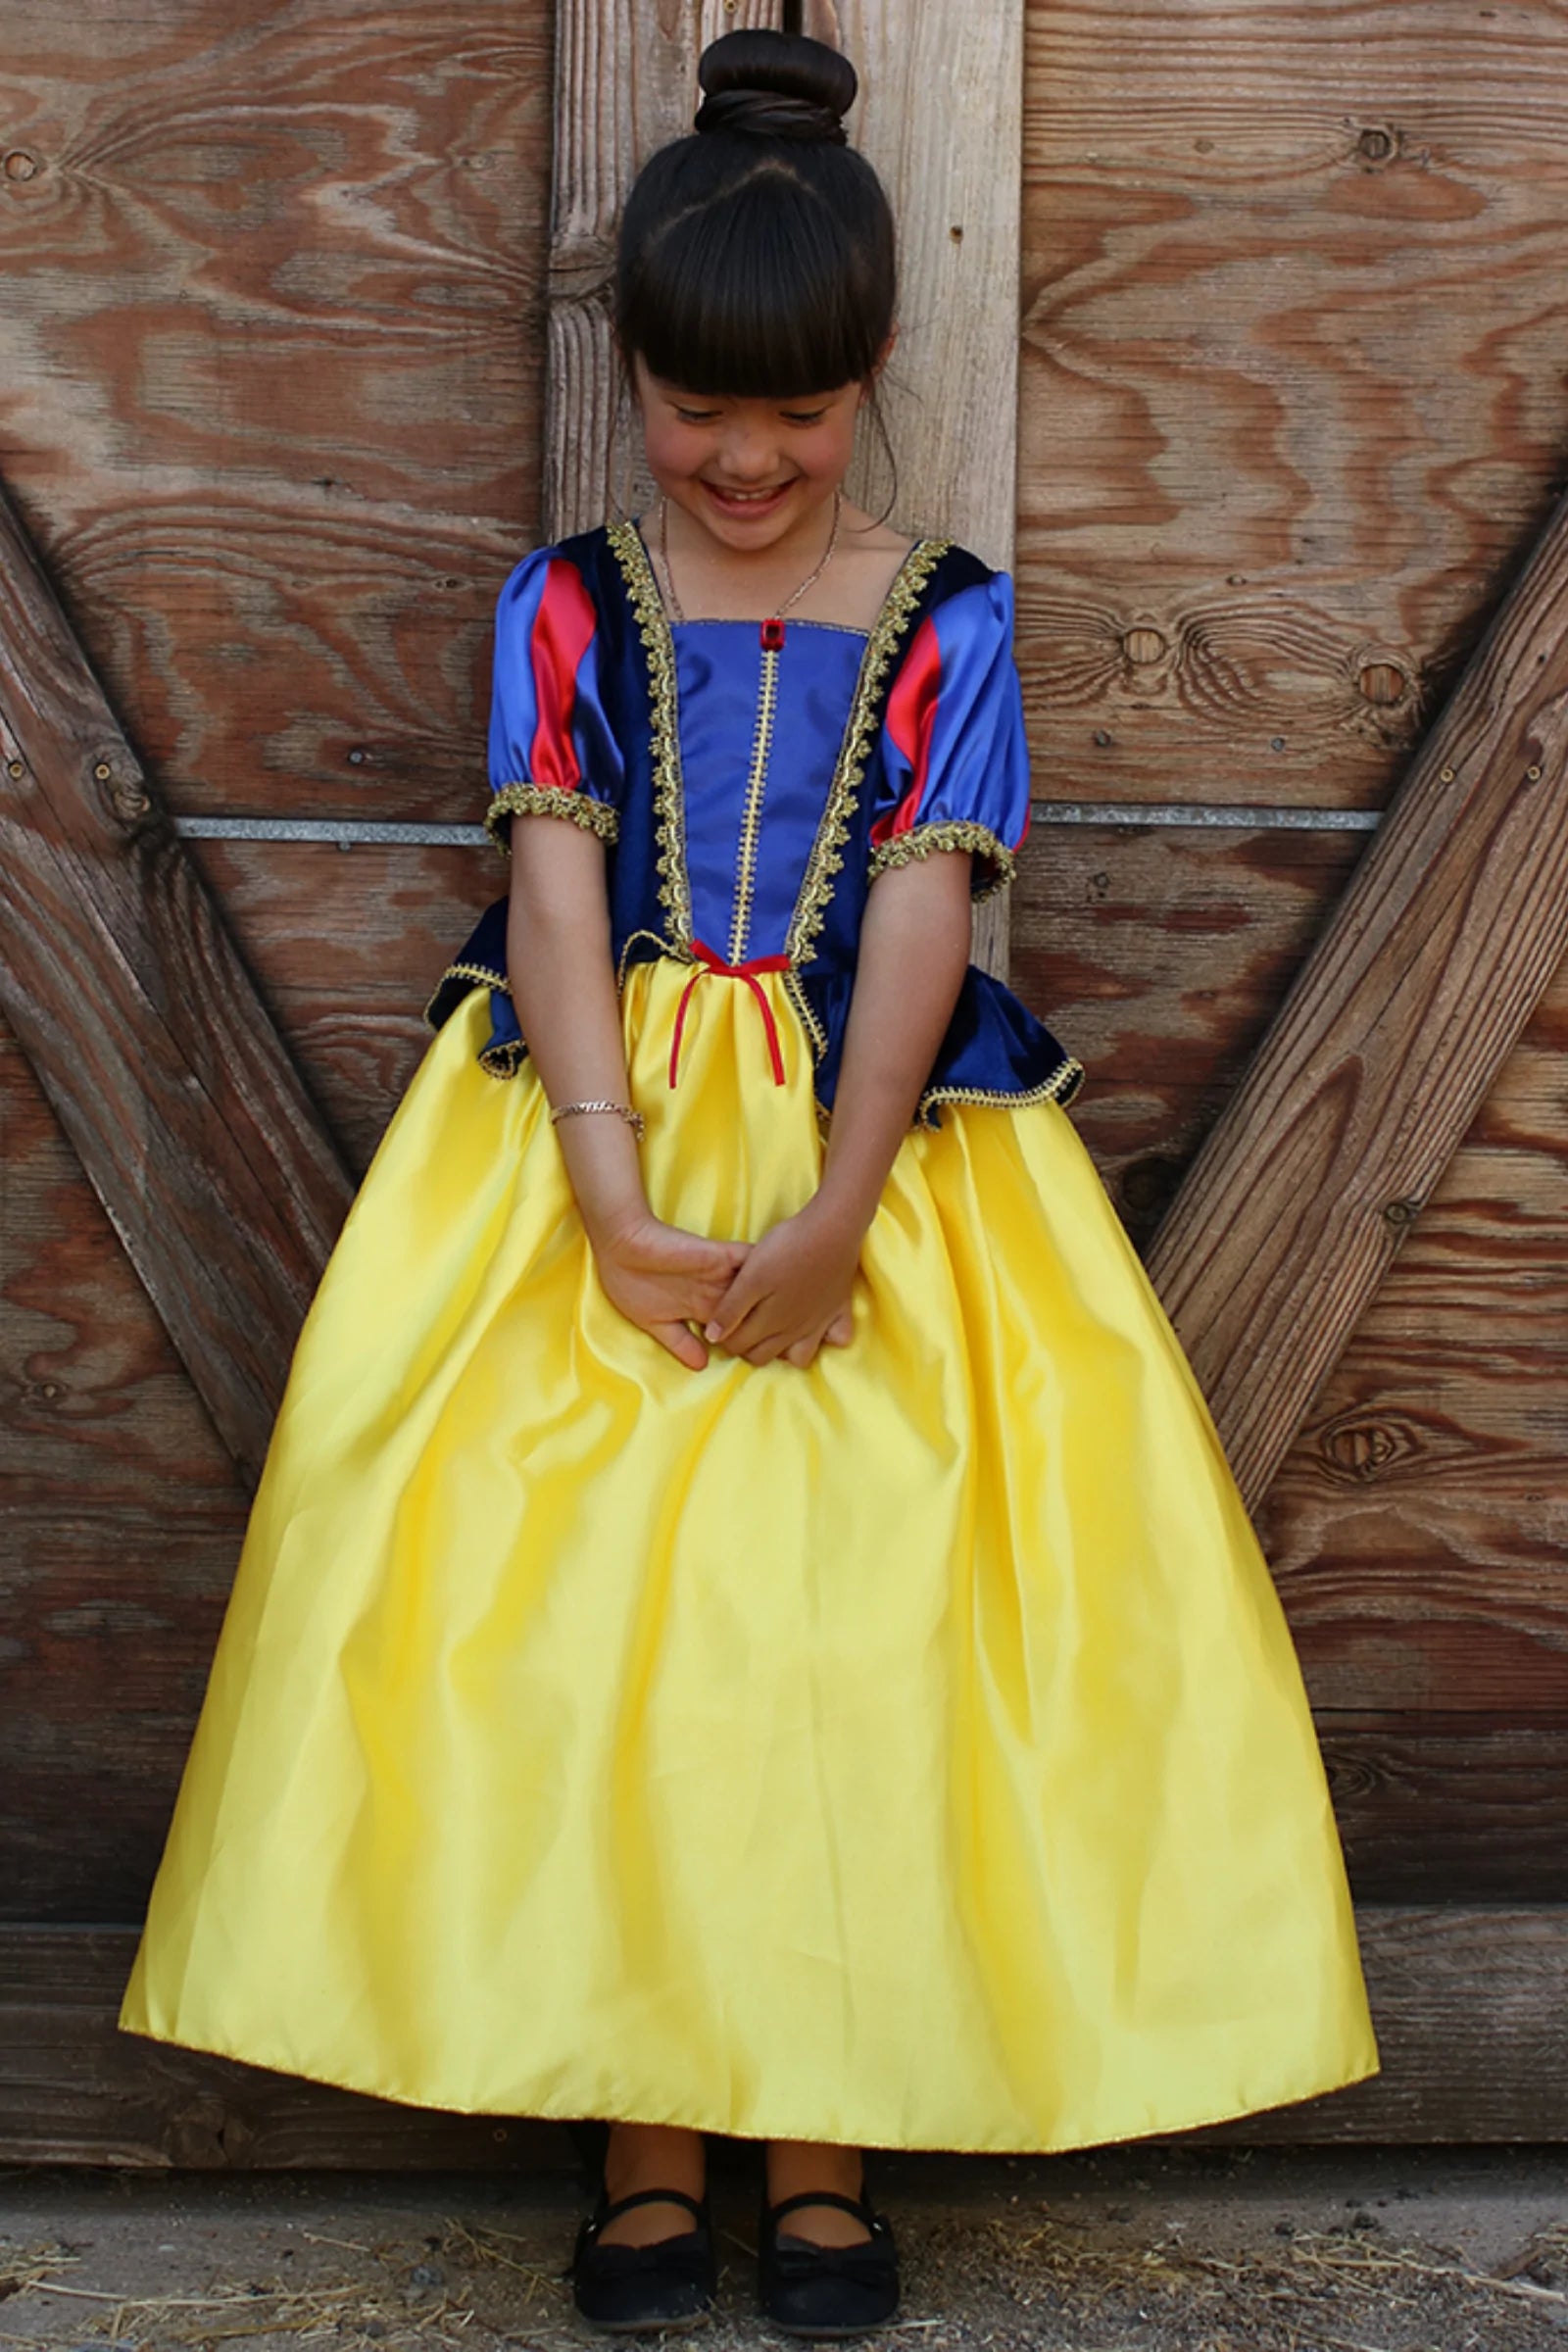 Deluxe Snow White Gown - Size 3/4 by Great Pretenders #35303